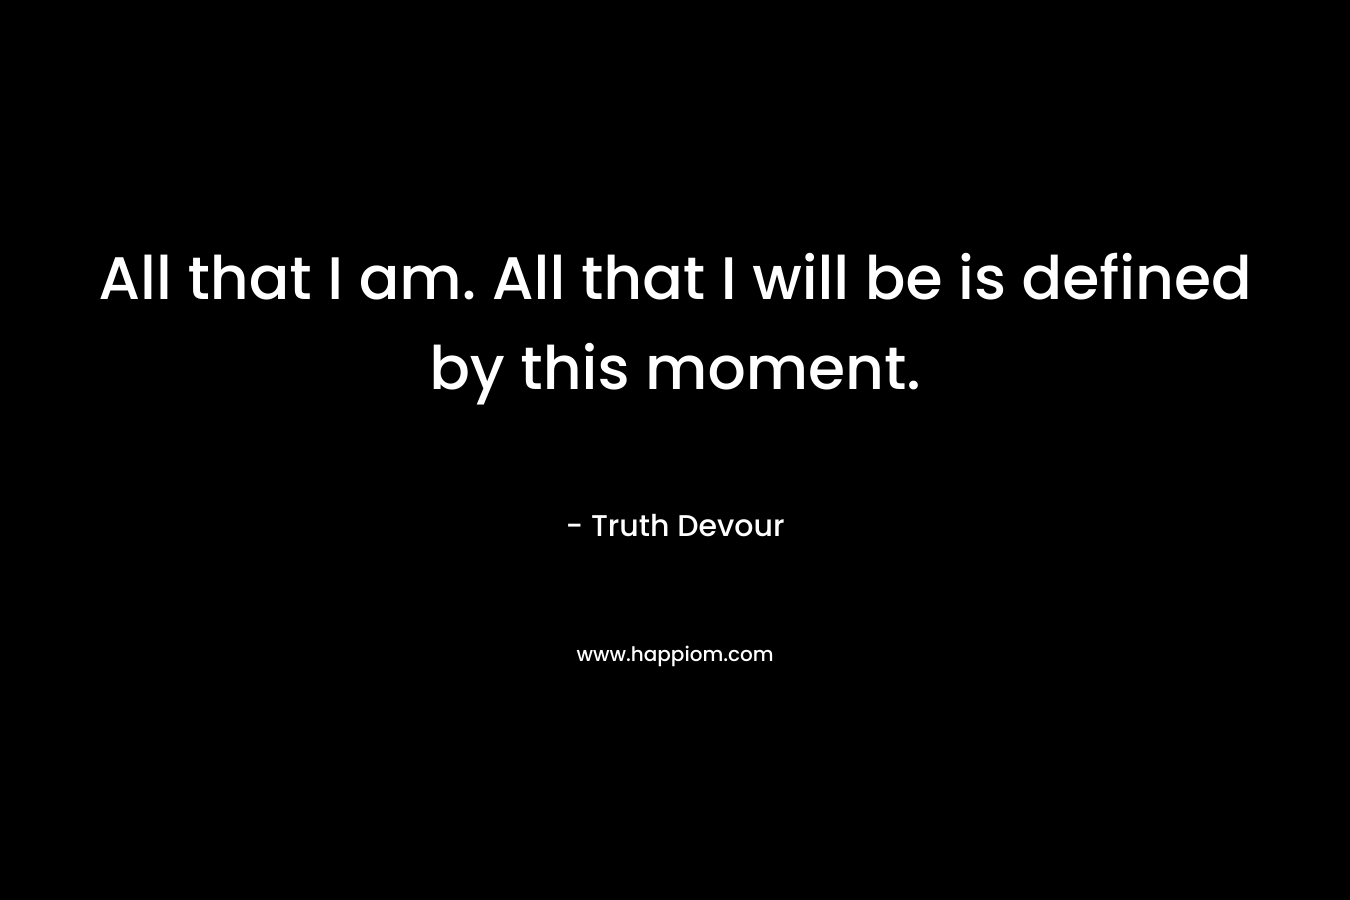 All that I am. All that I will be is defined by this moment.